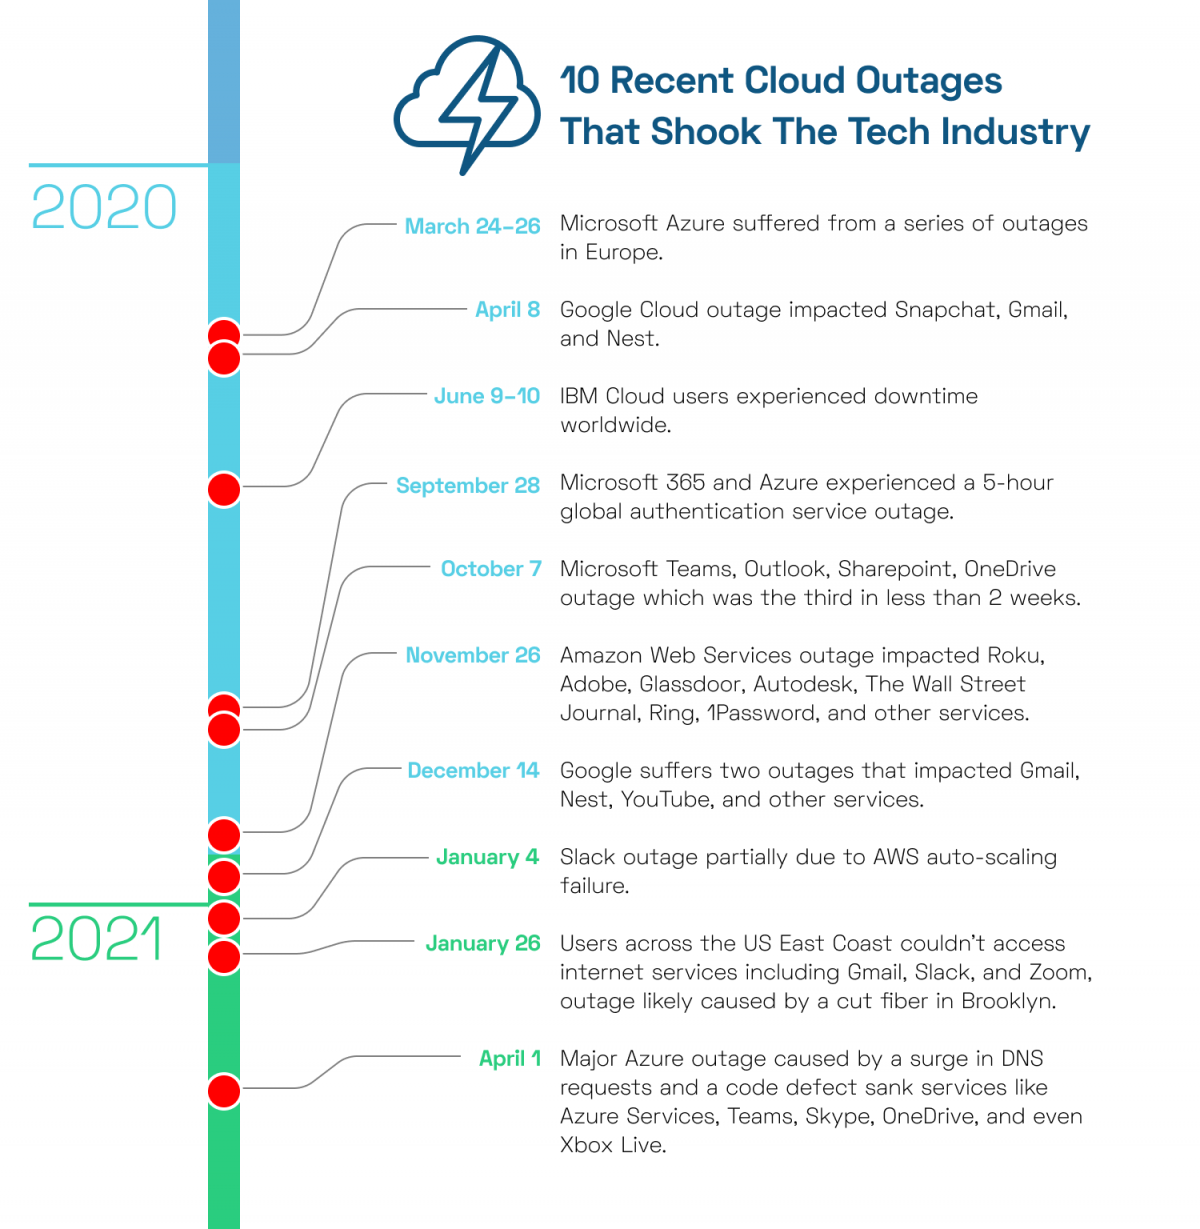 10 recent cloud outages